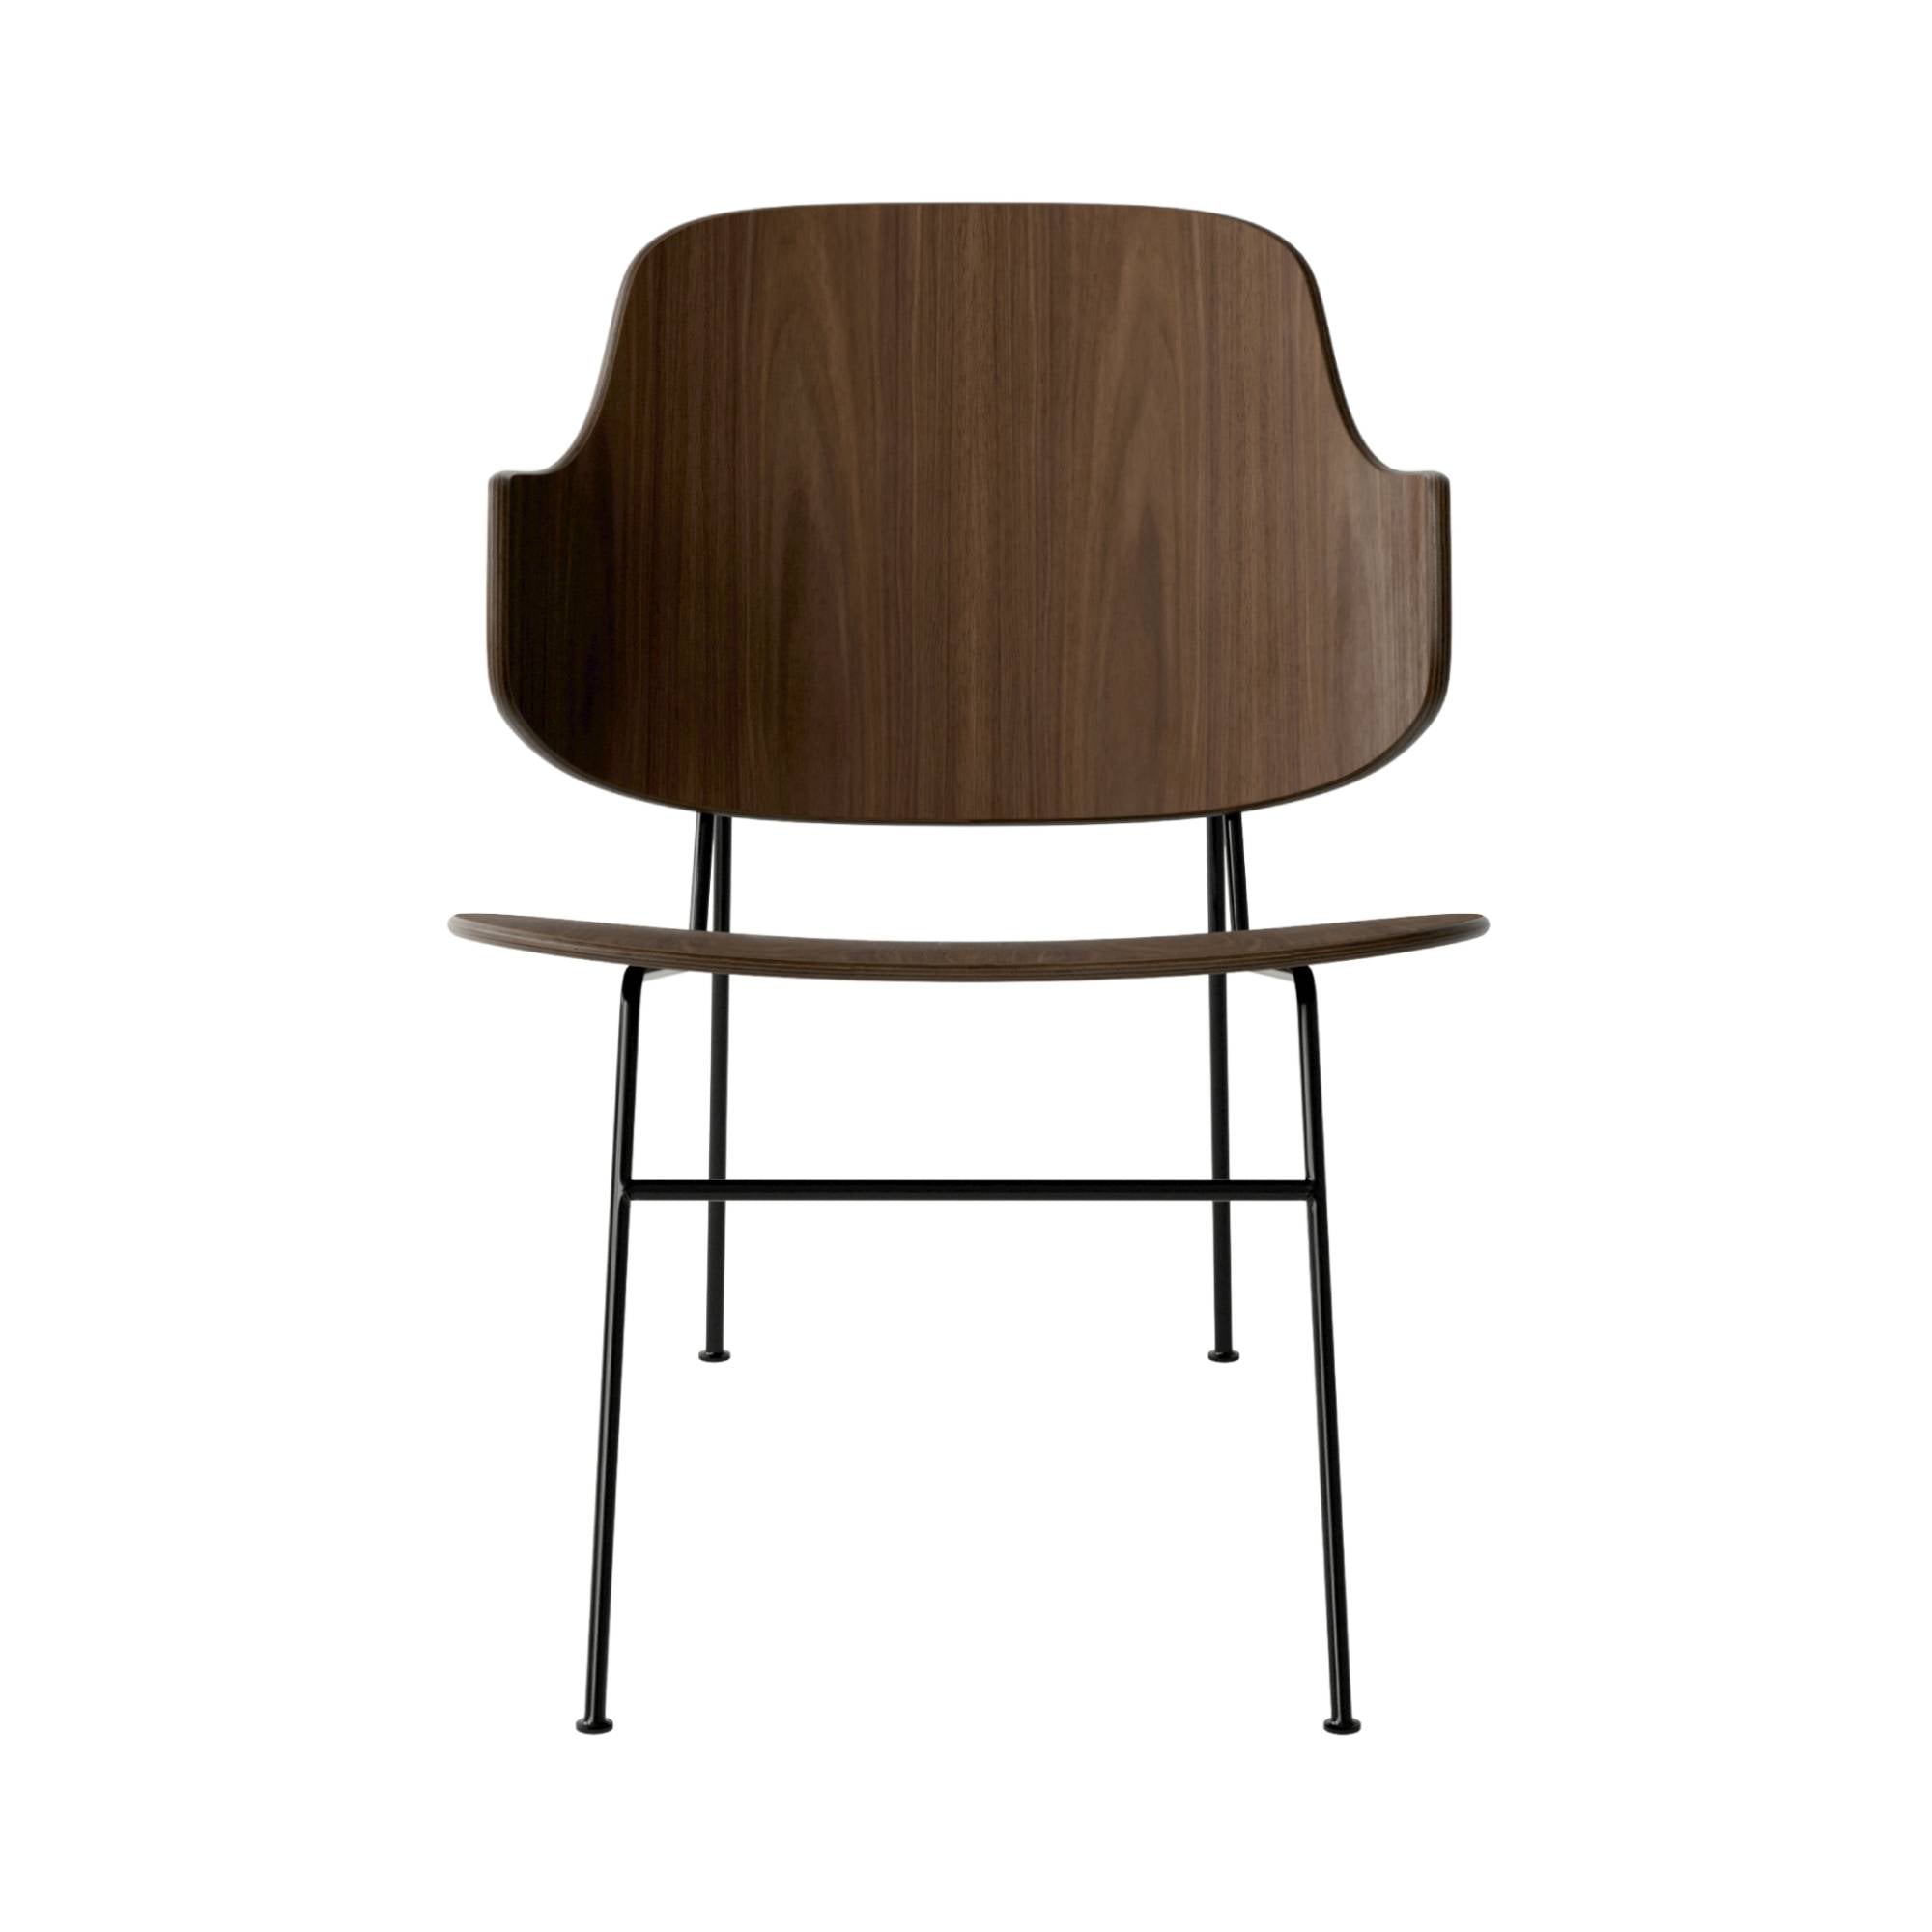 The Penguin Lounge Chair: Walnut